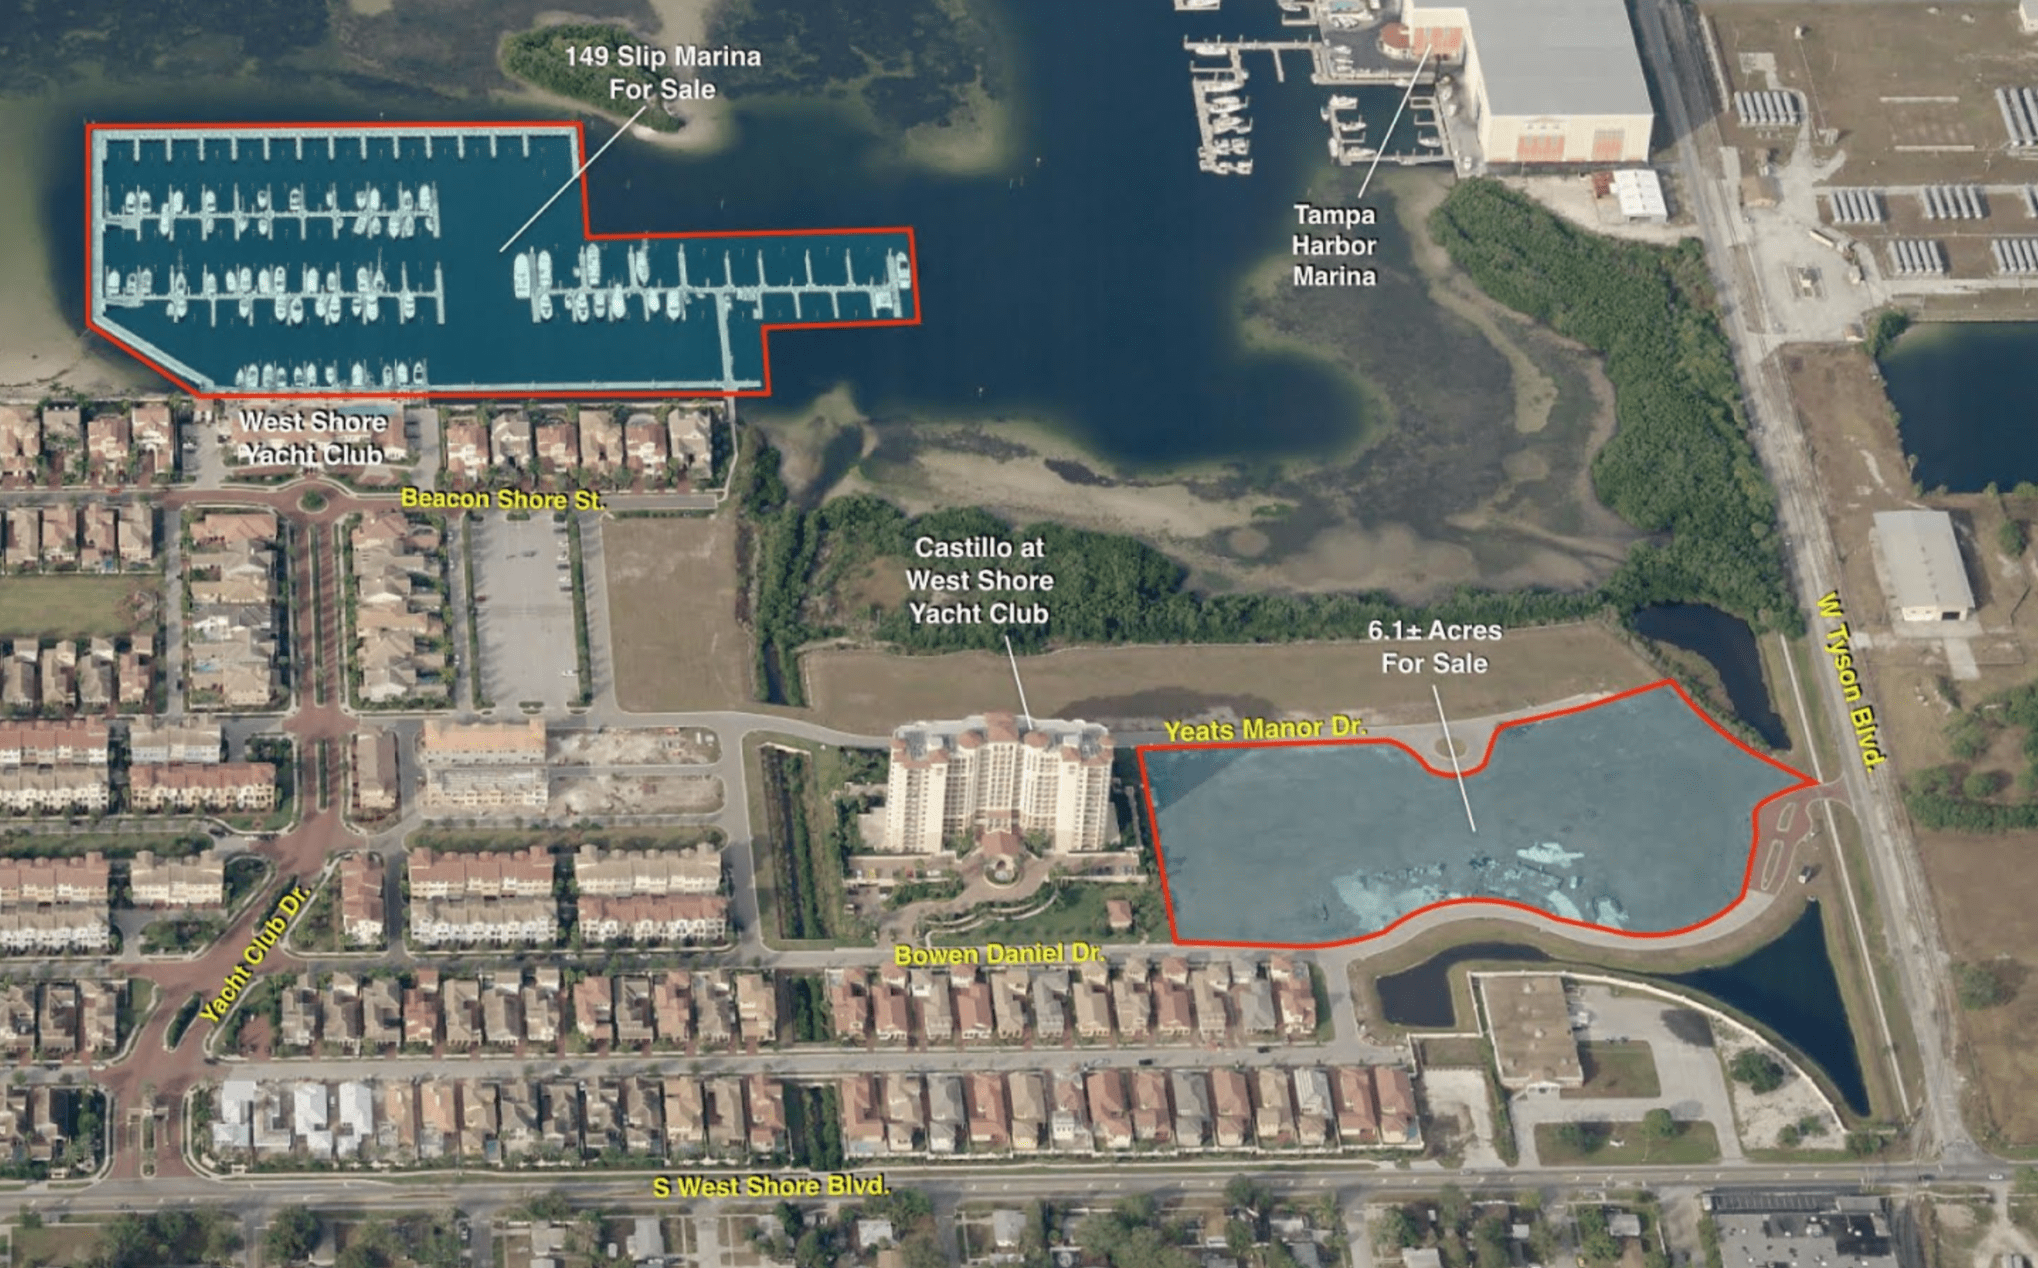 Westshore Yacht Club Land For Sale Outlined in Red